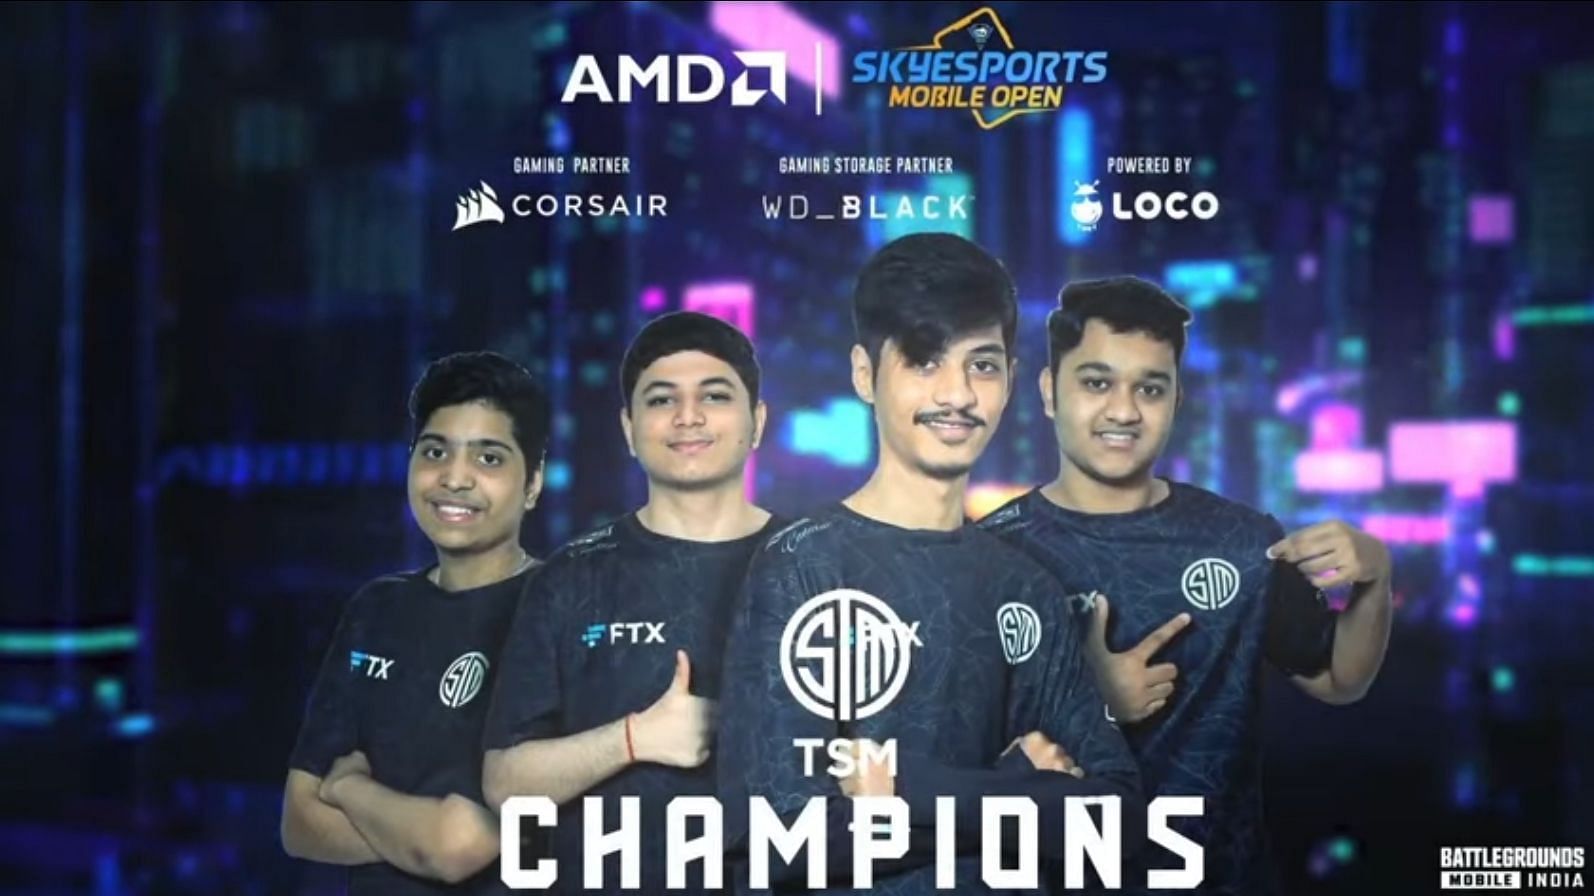 TSM took home 12 lakhs after clinching the Skyesports Mobile BGMI Open (Image via Skyesports/YouTube)